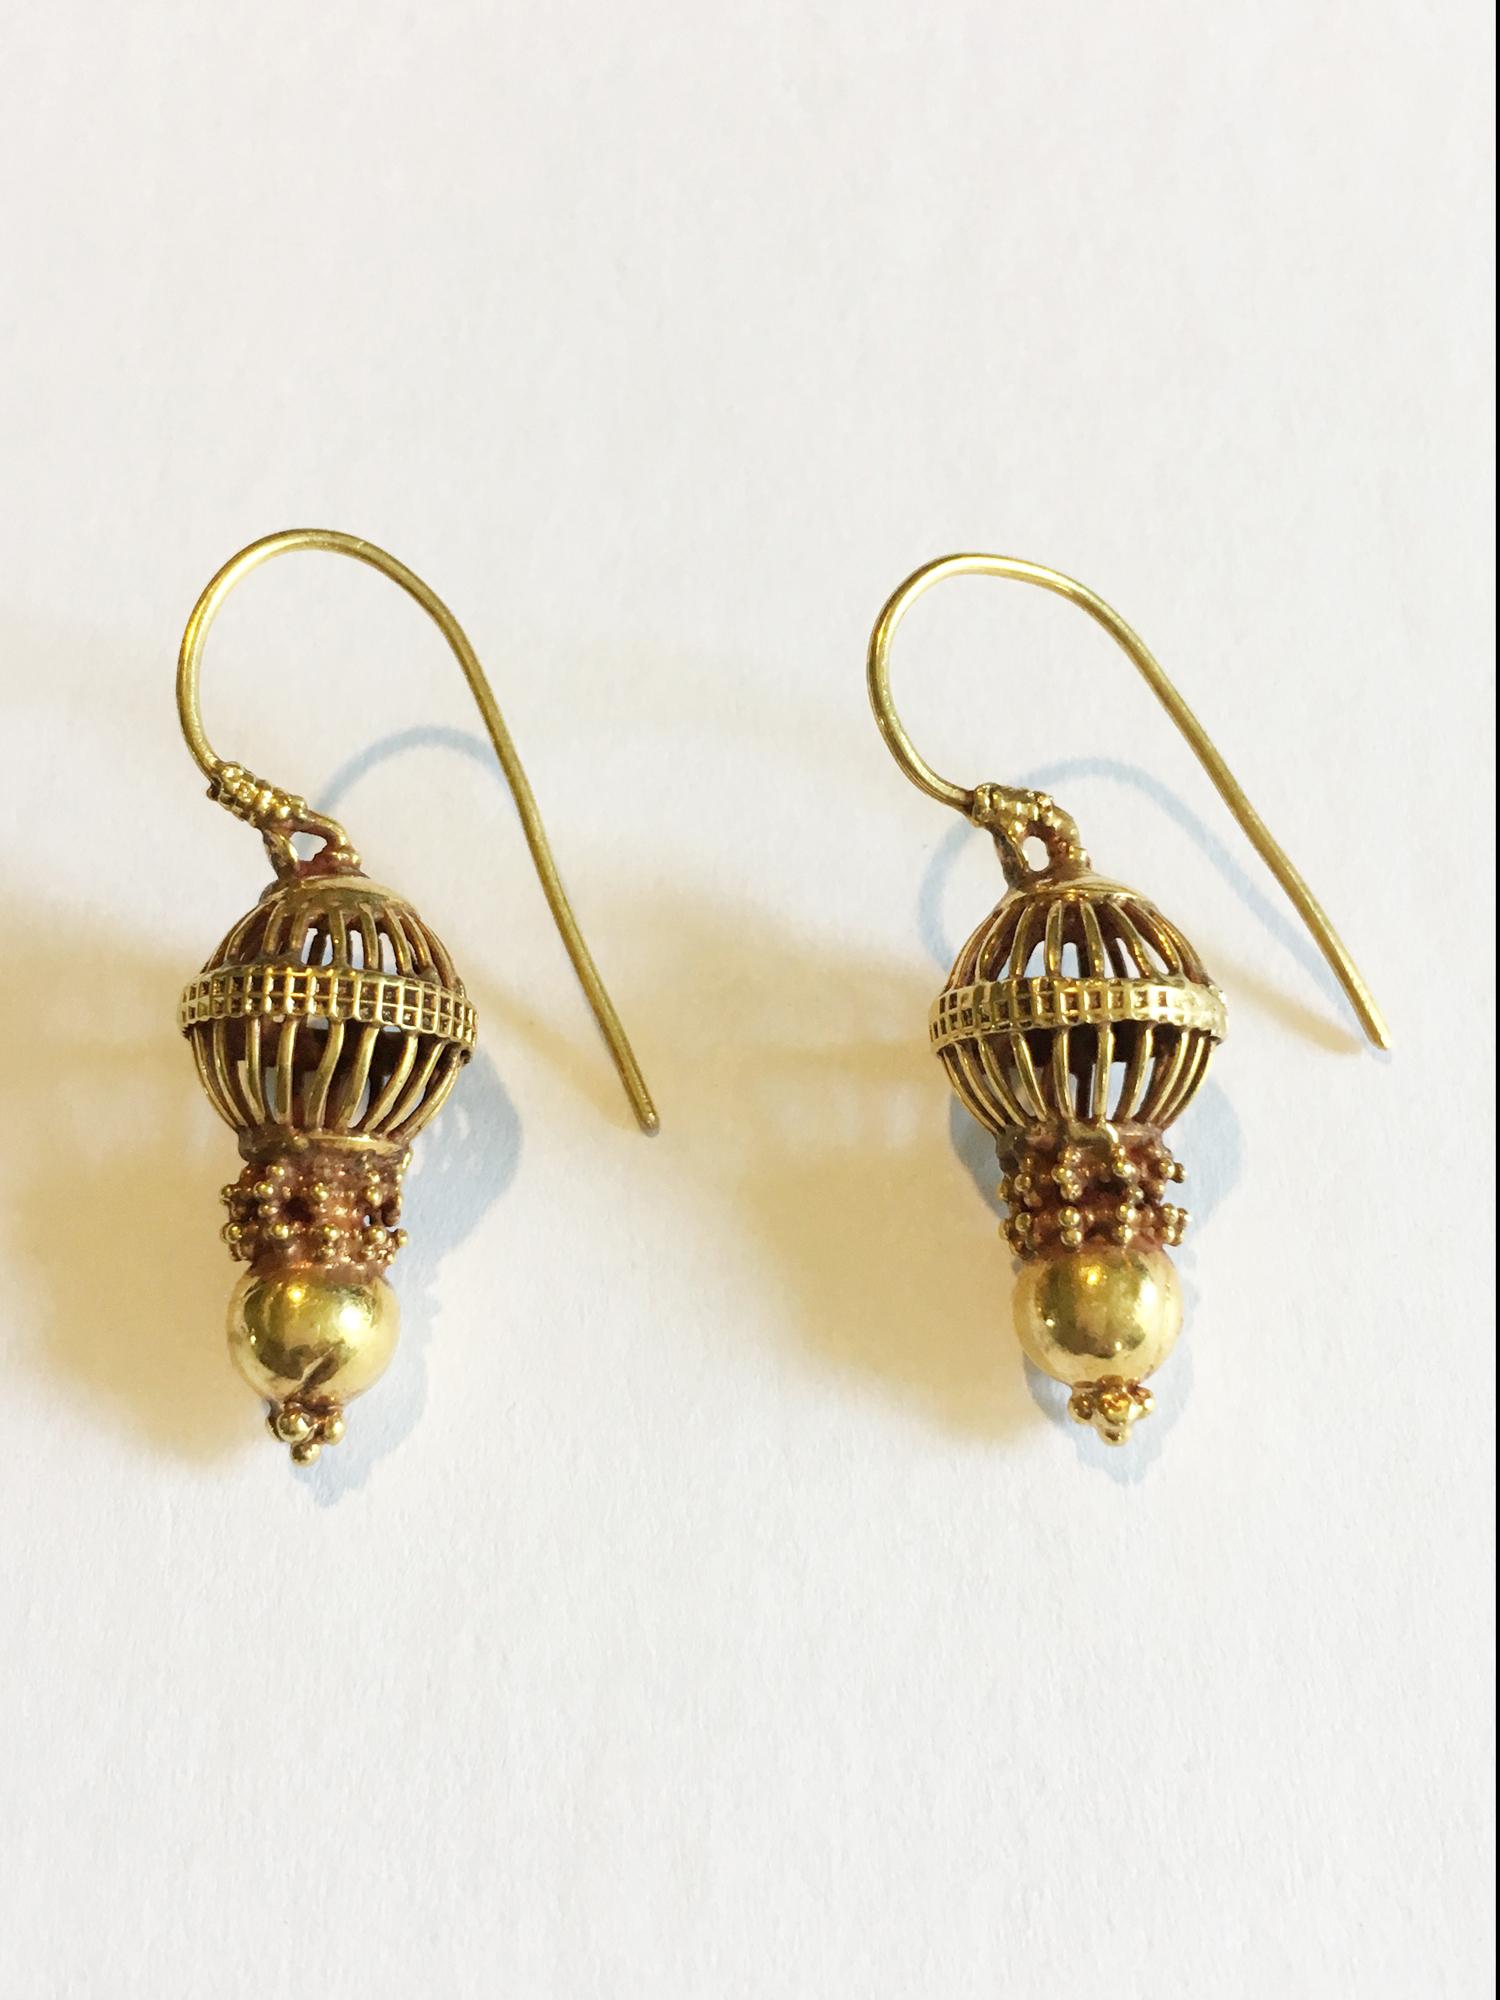 A wonderful pair of traditional 18 karat gold earrings with granulation work from central India. Made by hand in the mid-20th century, these delicately crafted earrings are versatile and easy-to-wear. Each earring weighs 3.3 grams.